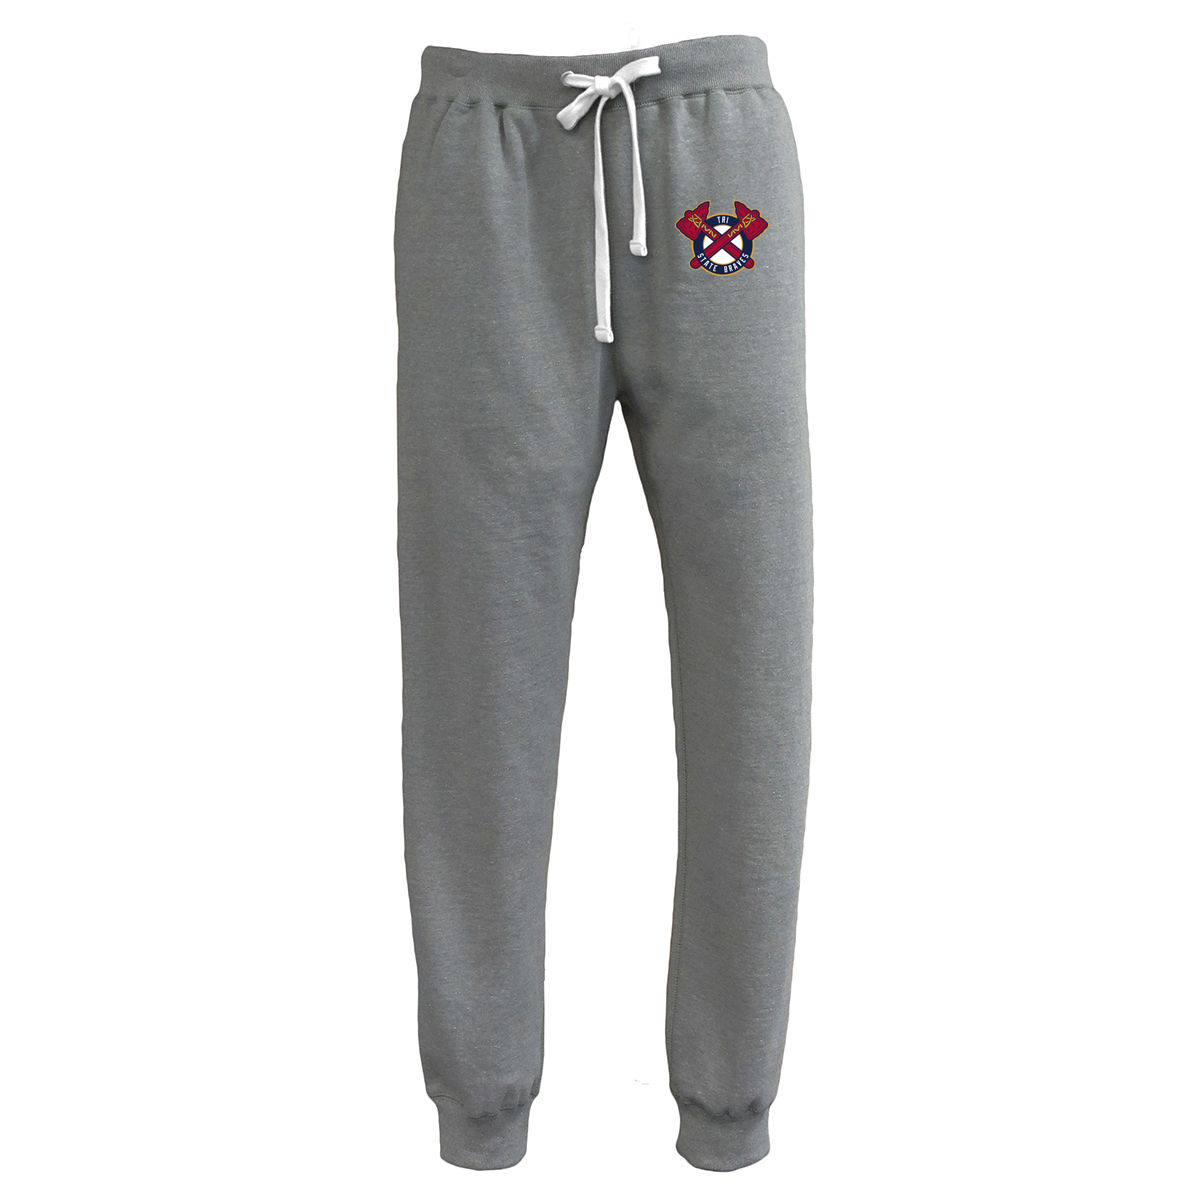 Tri-State Braves Joggers